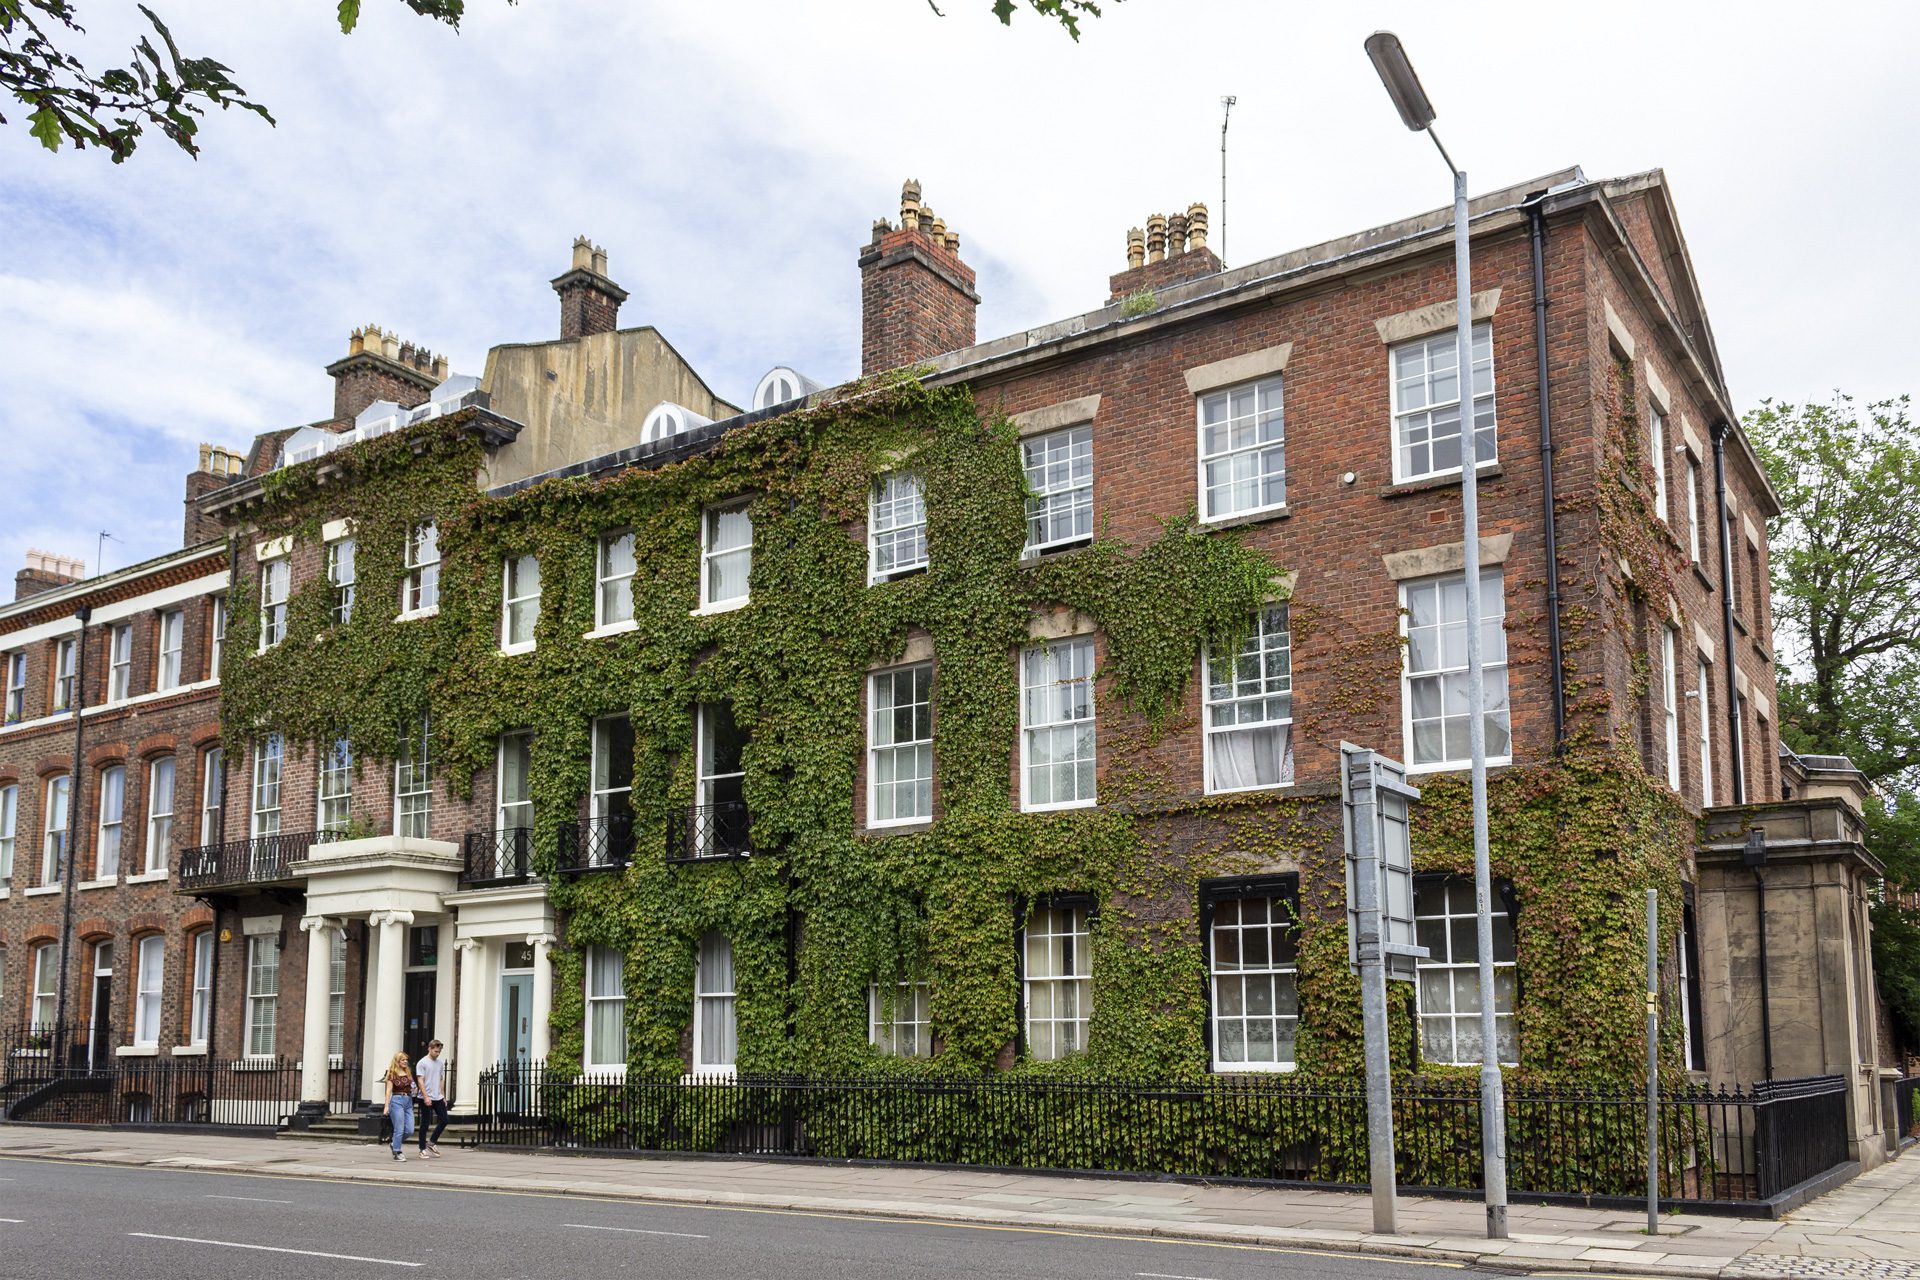 Liverpool / UK - July 6 2019: Ivy-covered houses on Catharine Street, Georgian Quarter, Liverpool.